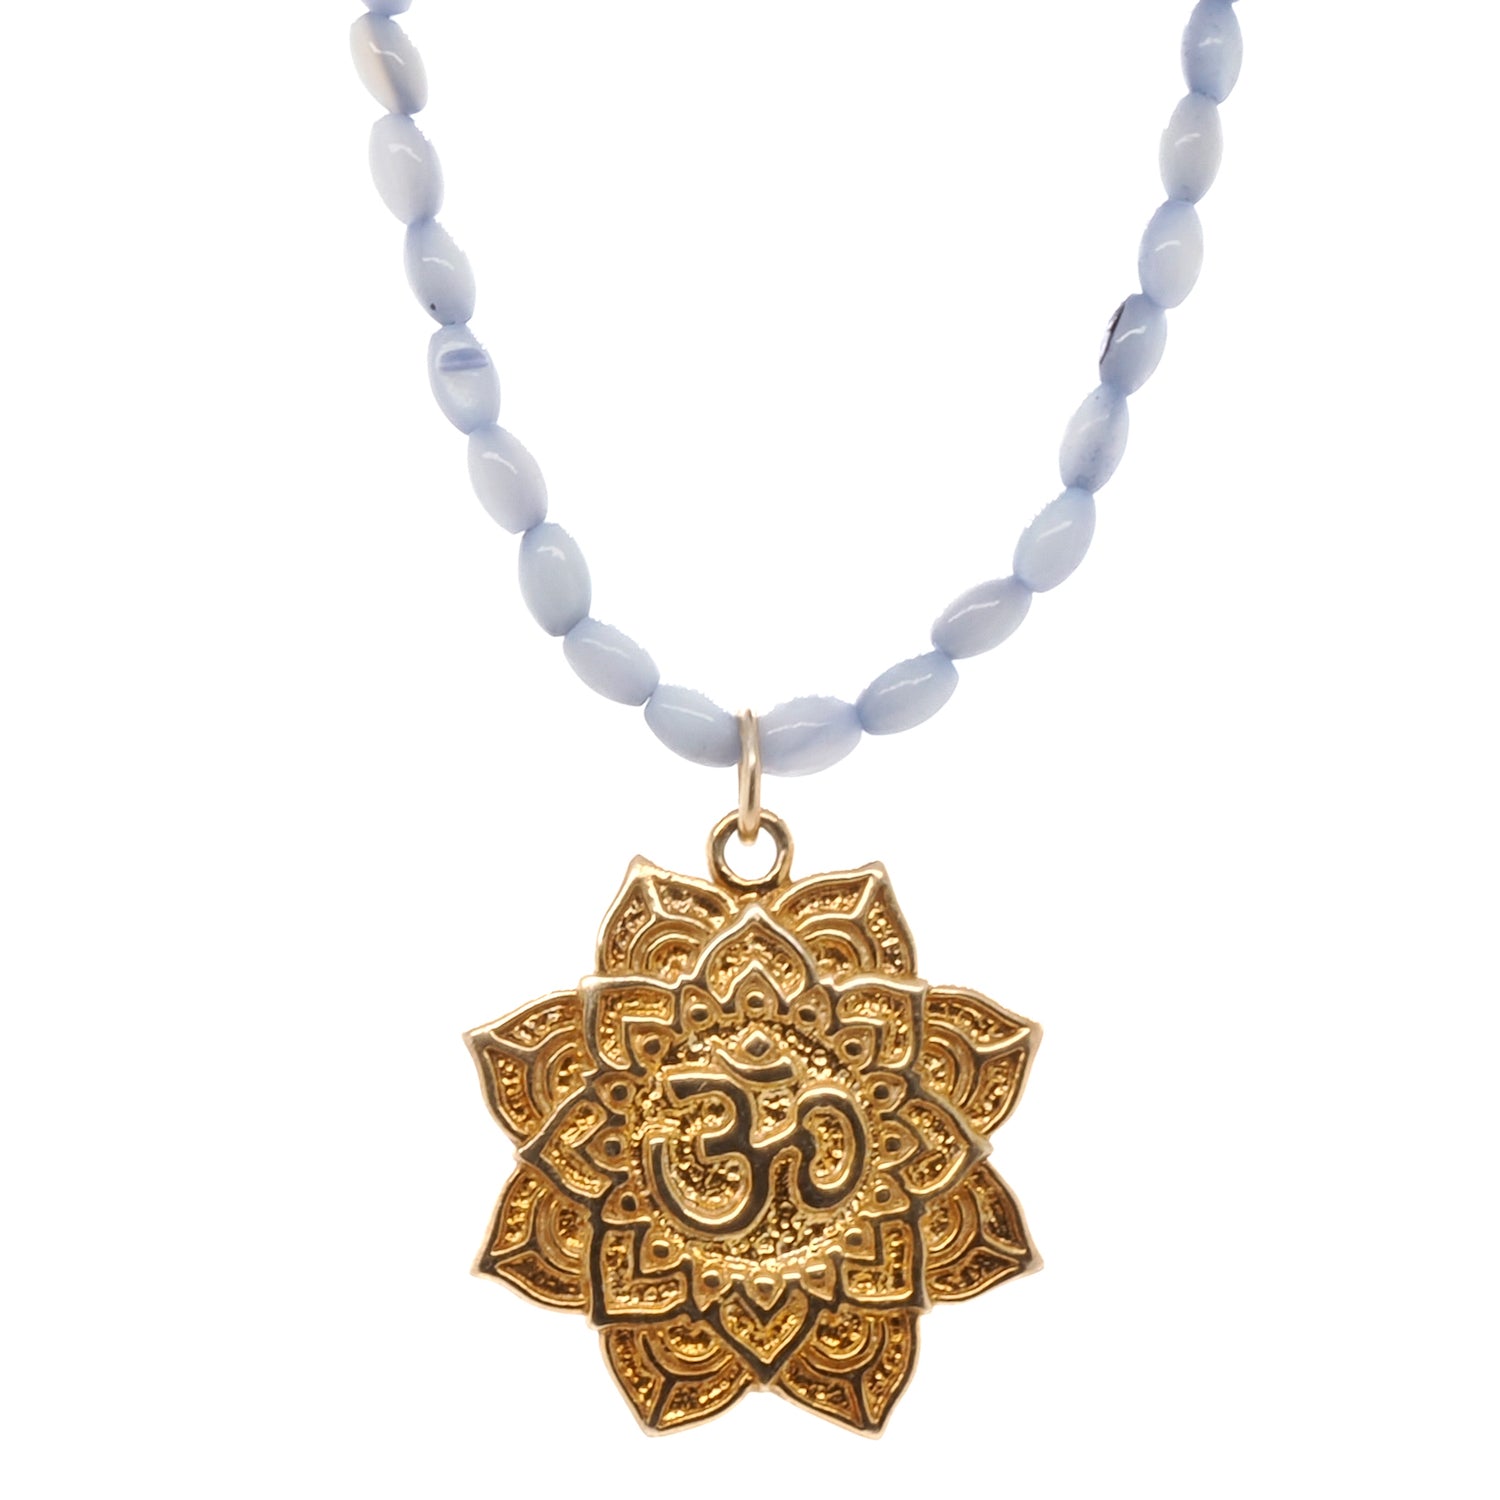 Spiritual Journey Yoga Necklace with blue mother of pearl beads and a lotus pendant.